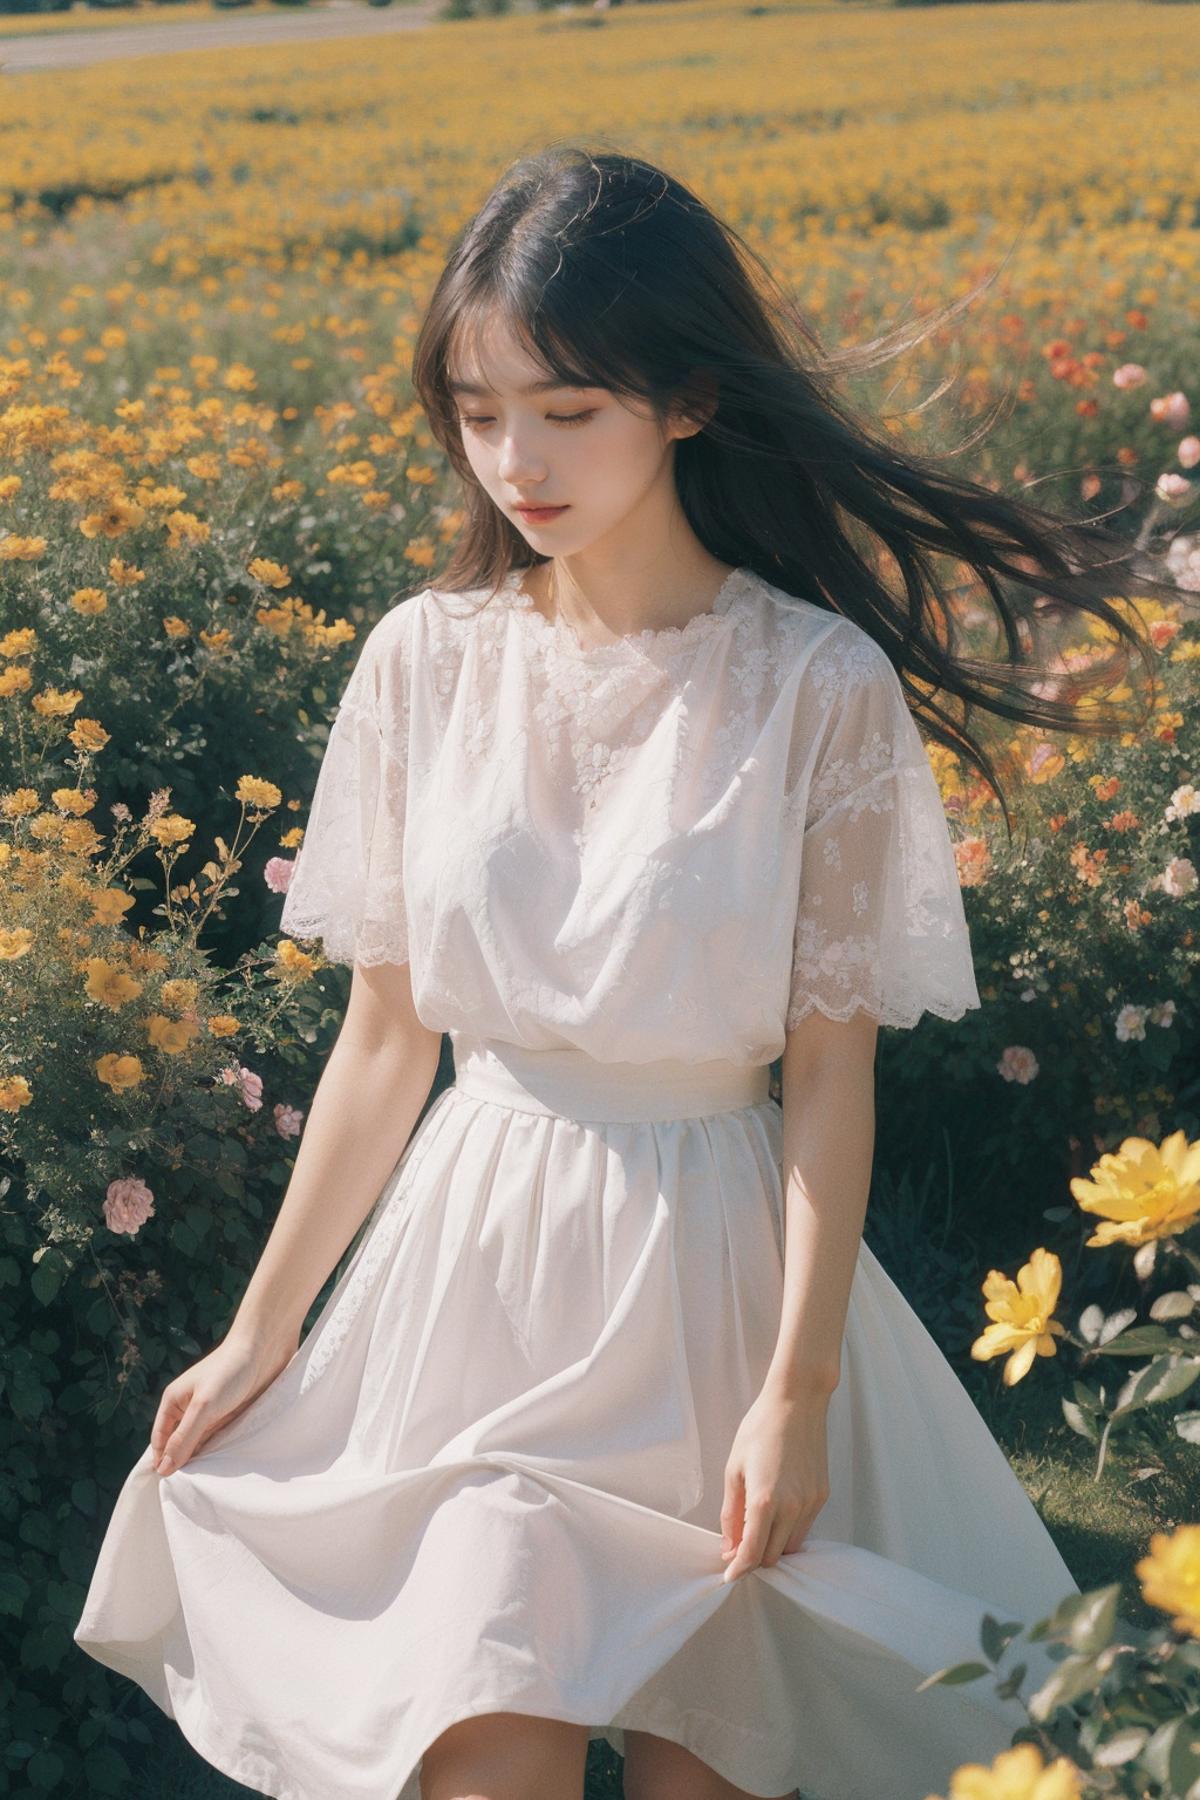 A woman in a white dress stands in a field of flowers.